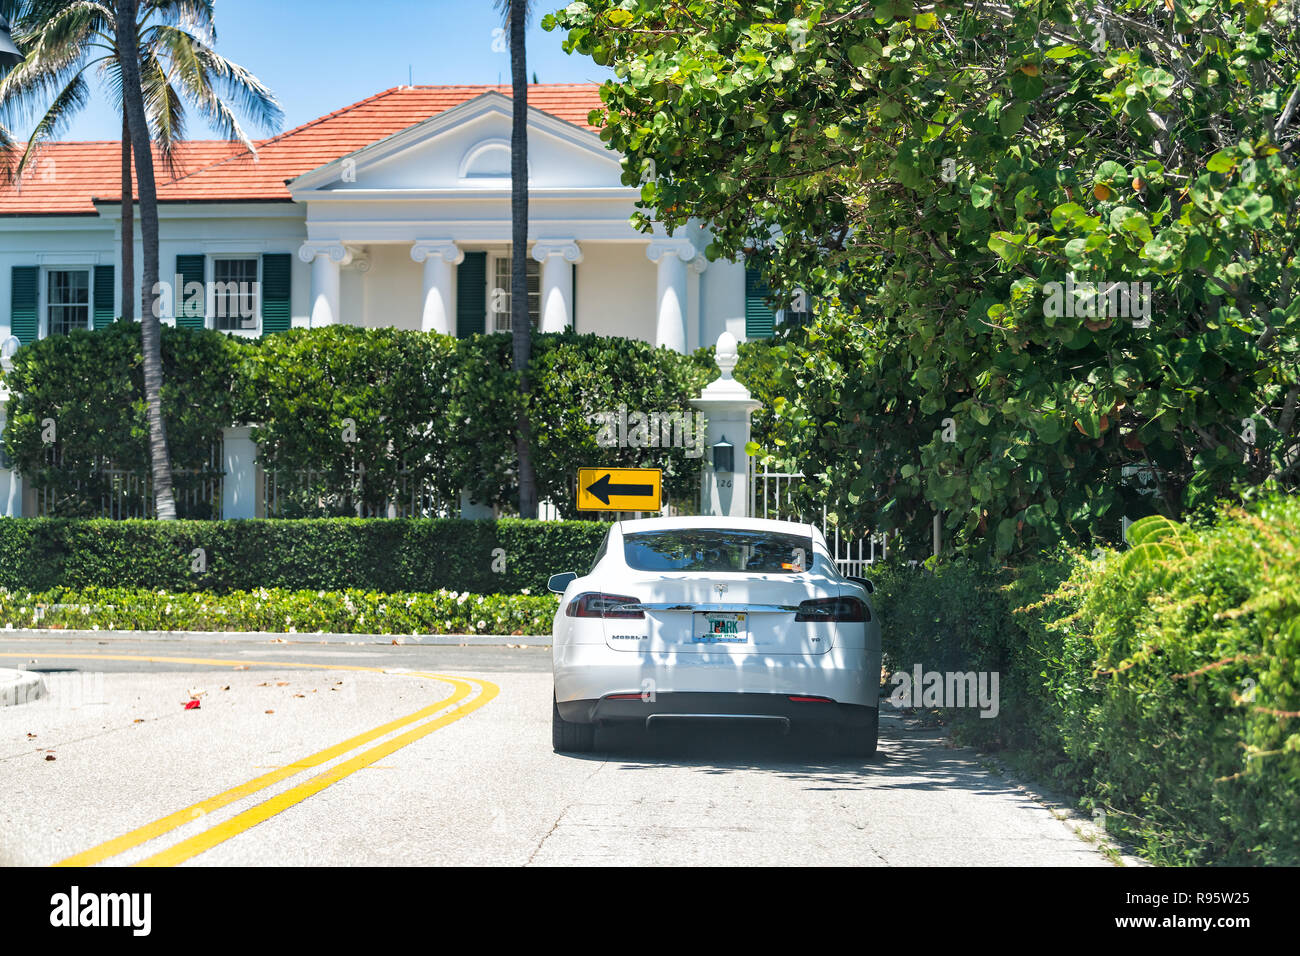 Palm Beach, USA - May 9, 2018: Mar-a-lago architecture, resort building, presidential residence of Donald J Trump, american president in Florida with  Stock Photo